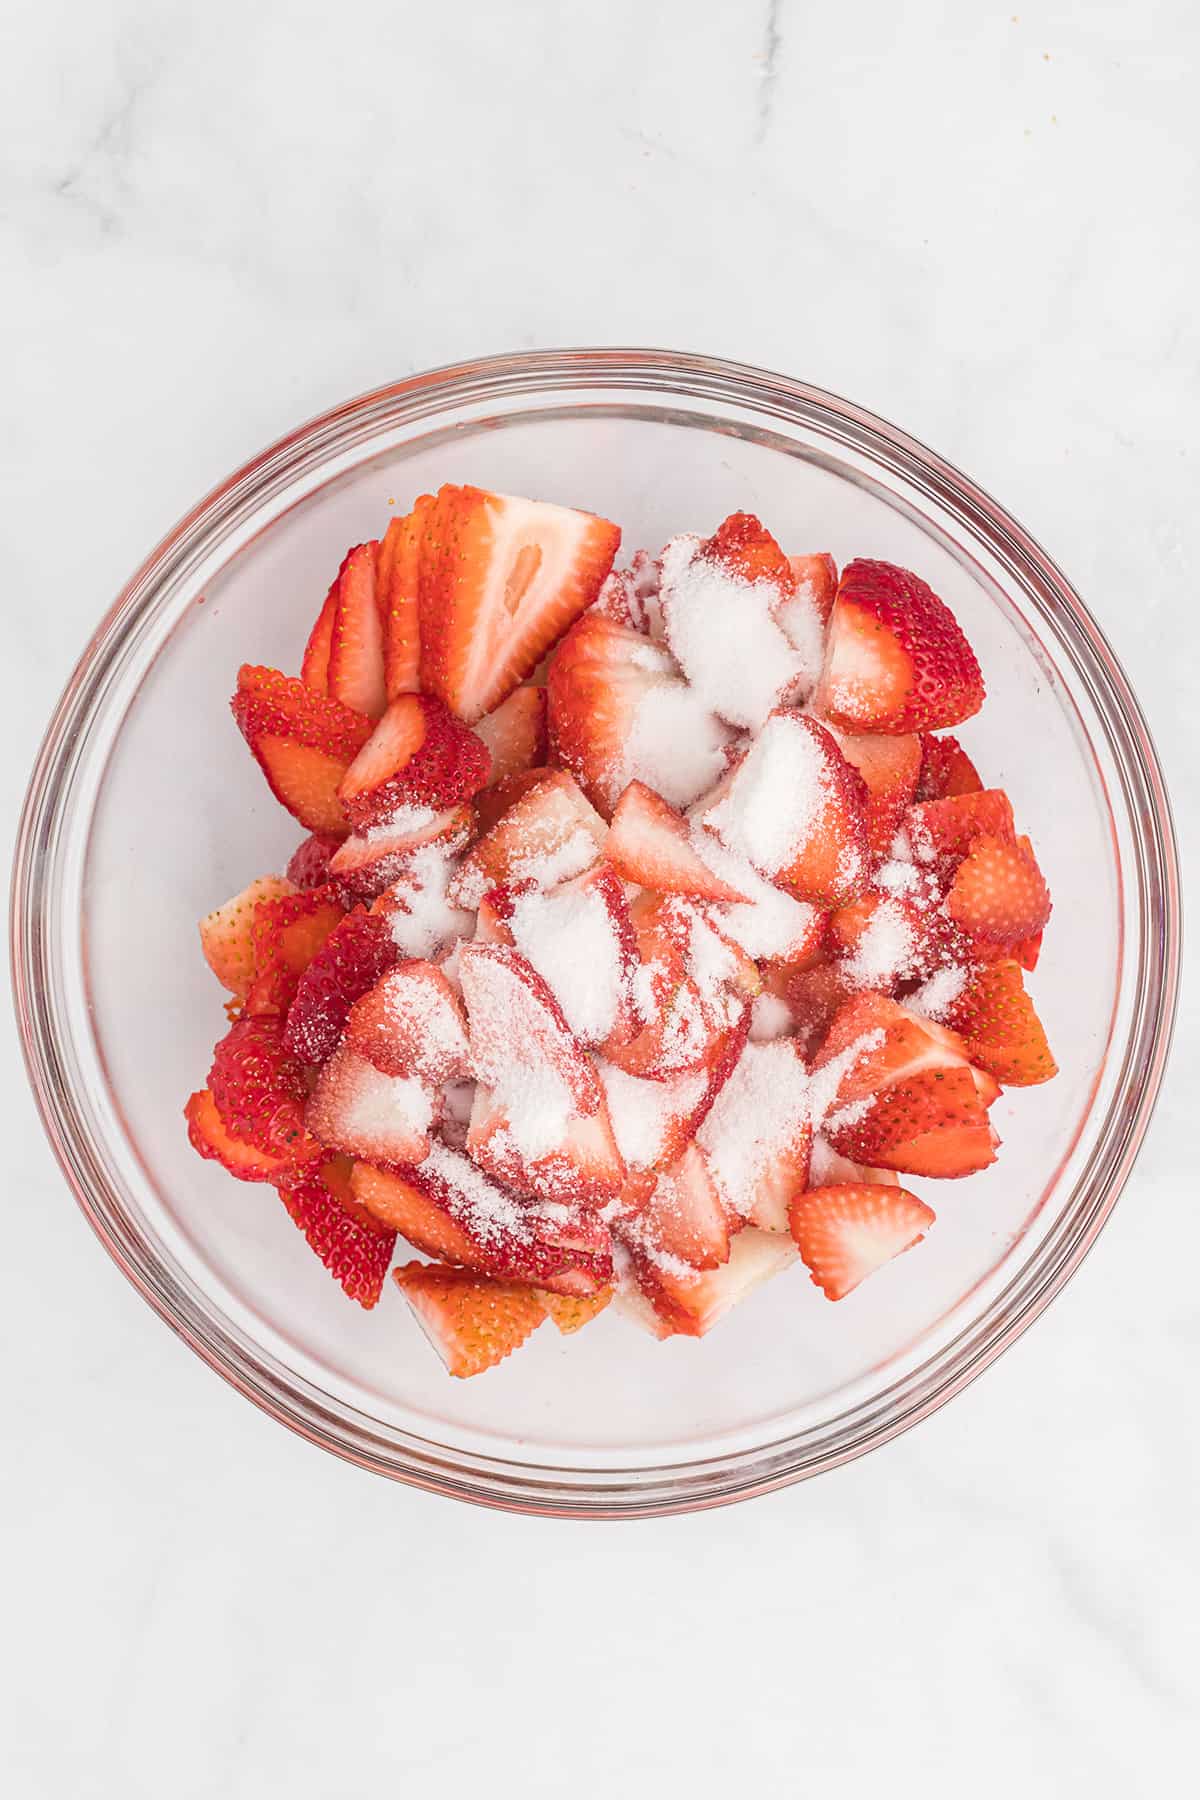 Strawberries with sugar sprinkled on top in a bowl.